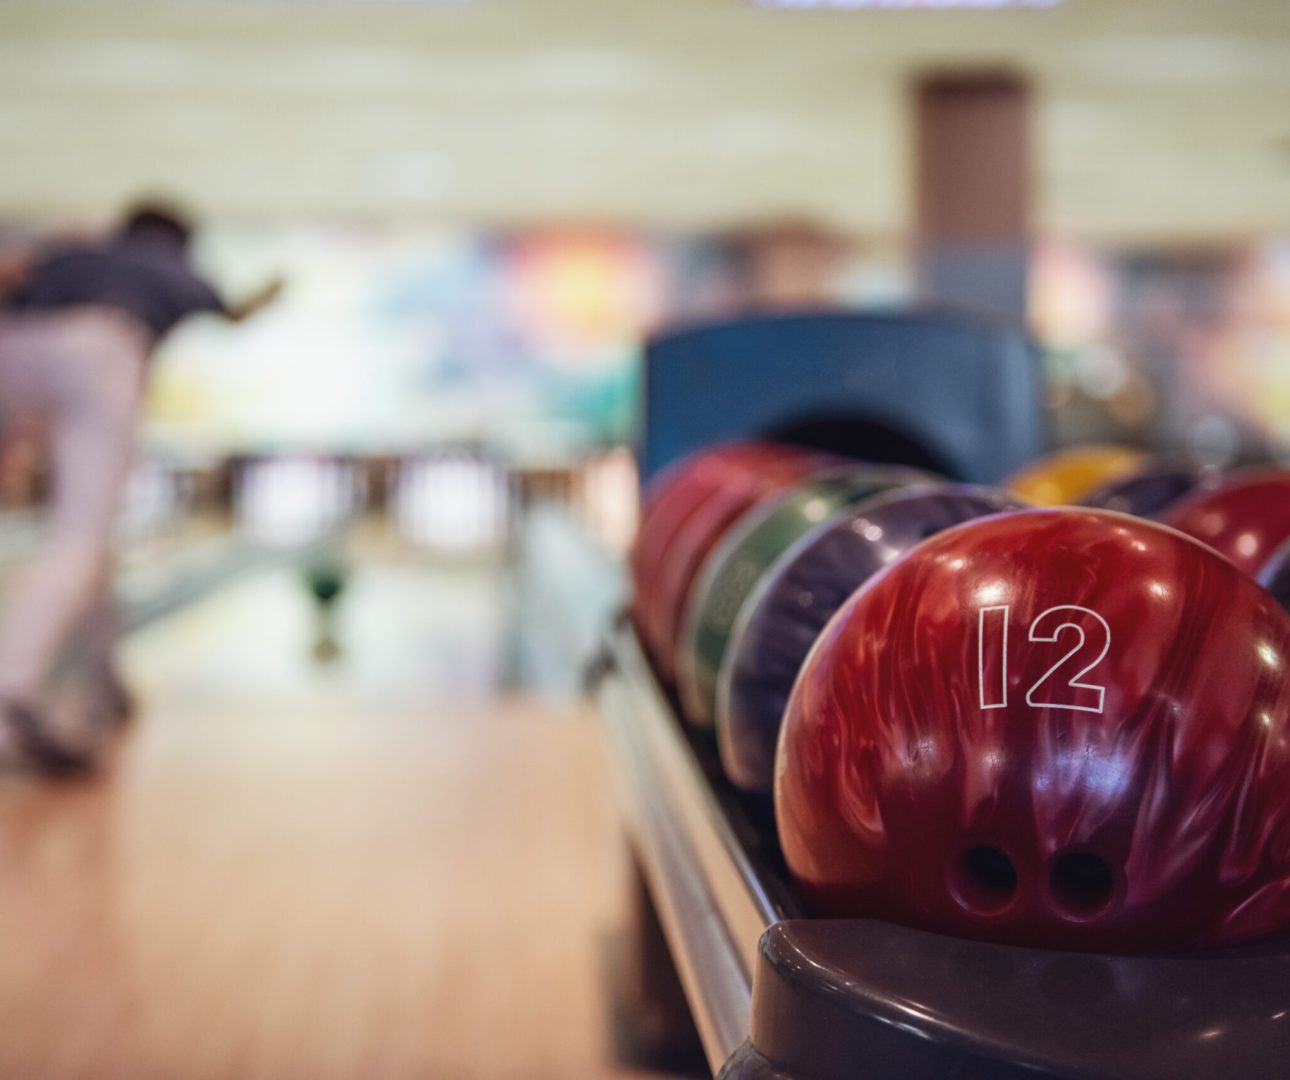 Man throwing a red bowling ball, colorful balls in the foreground